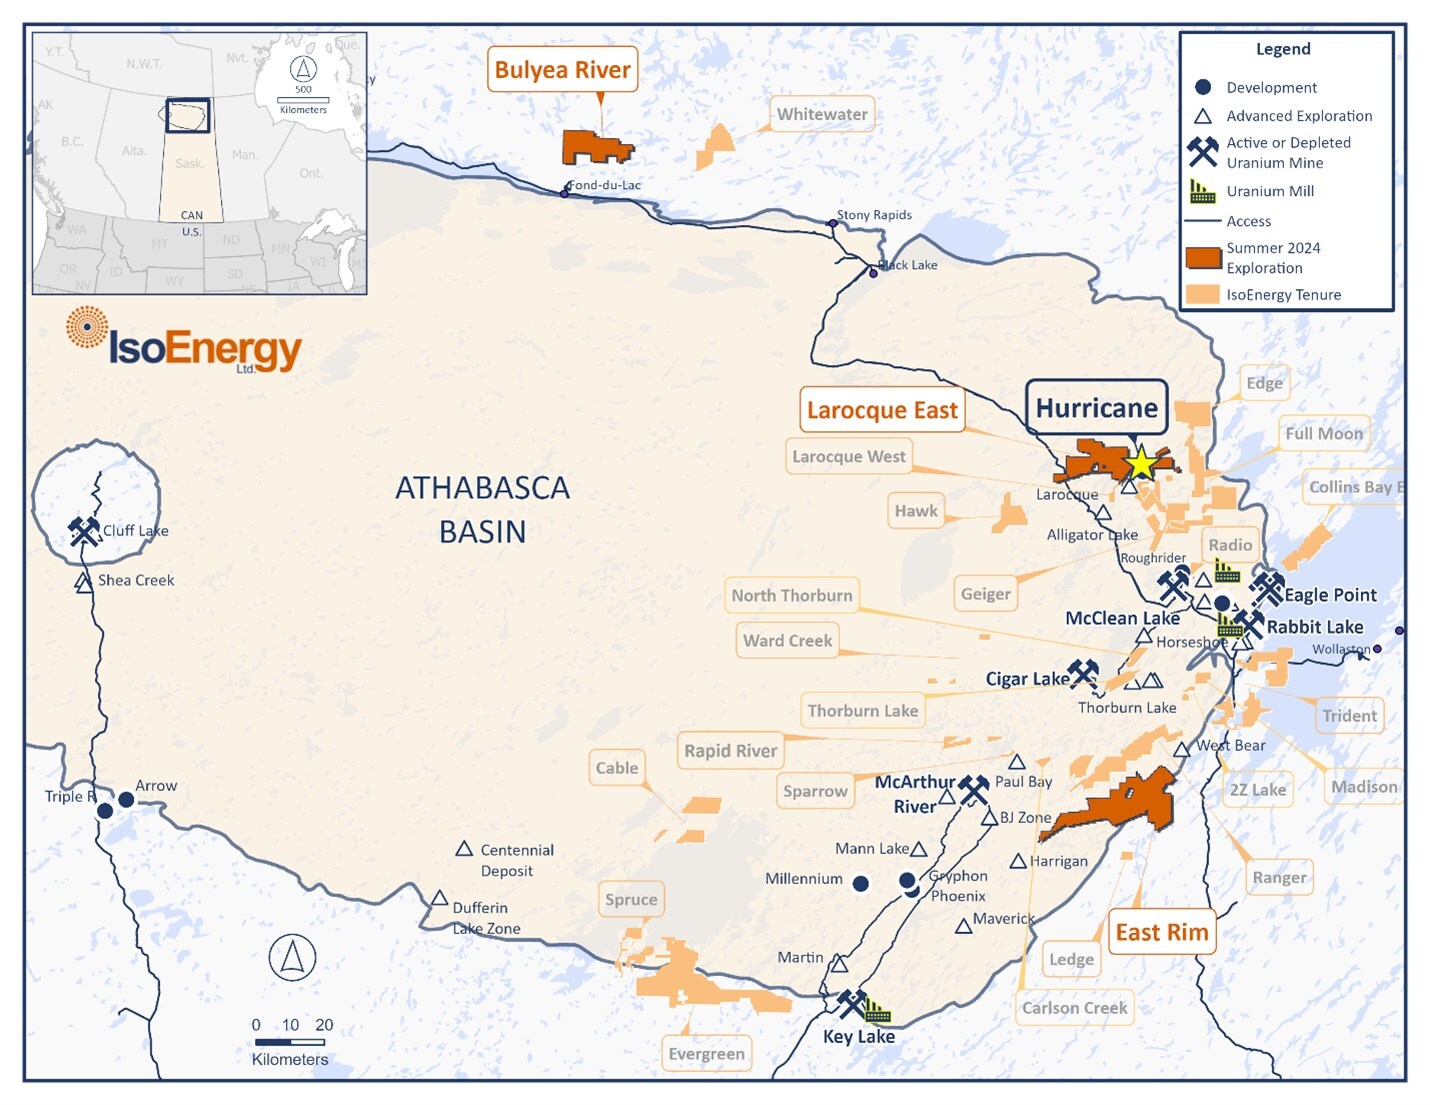 Figure 1 – Location map of the Hurricane deposit and exploration projects in the eastern Athabasca Basin. (CNW Group/IsoEnergy Ltd.)